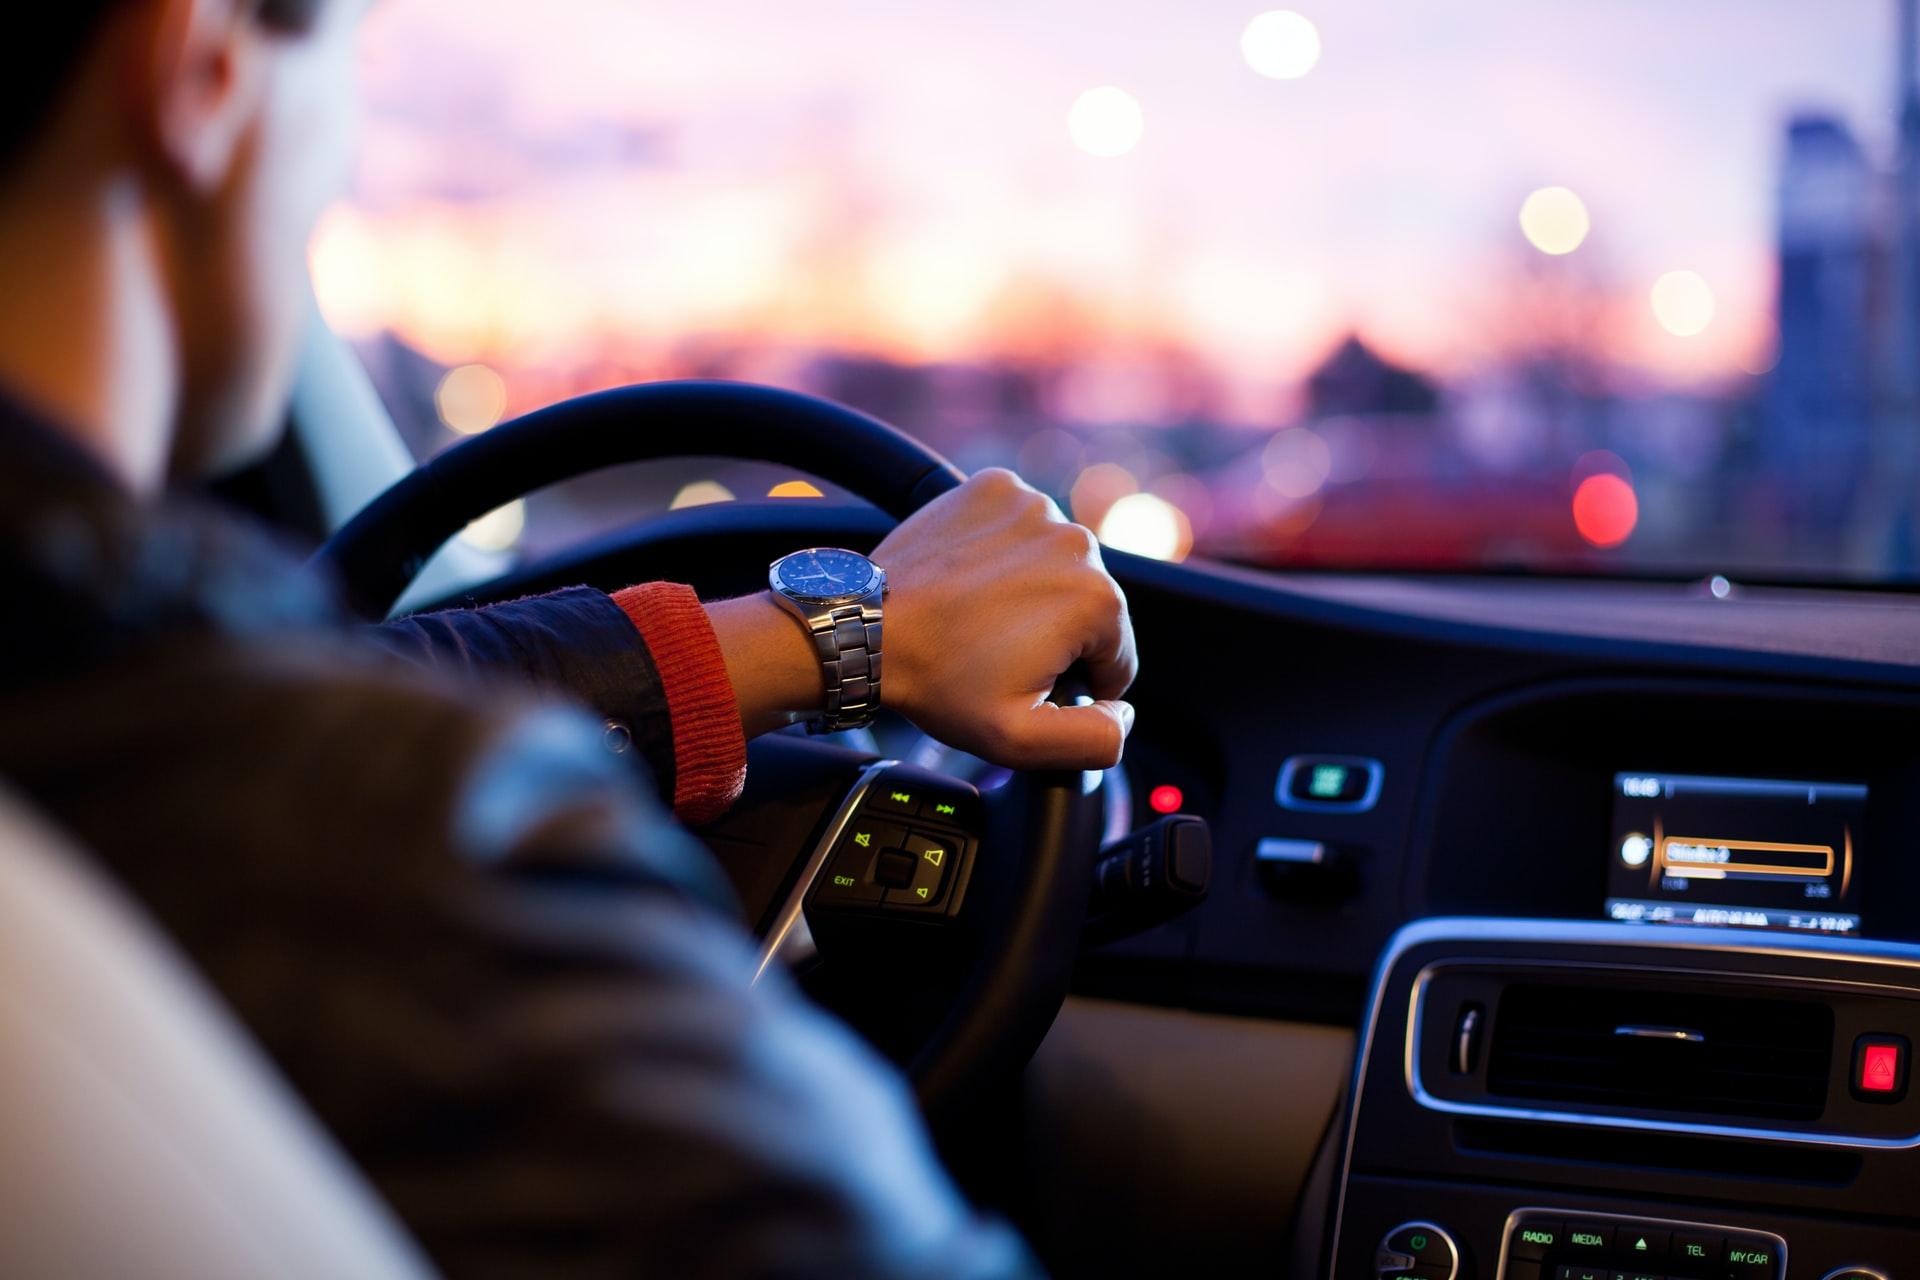 There are several habits of annoying drivers that should be avoided for safe driving.